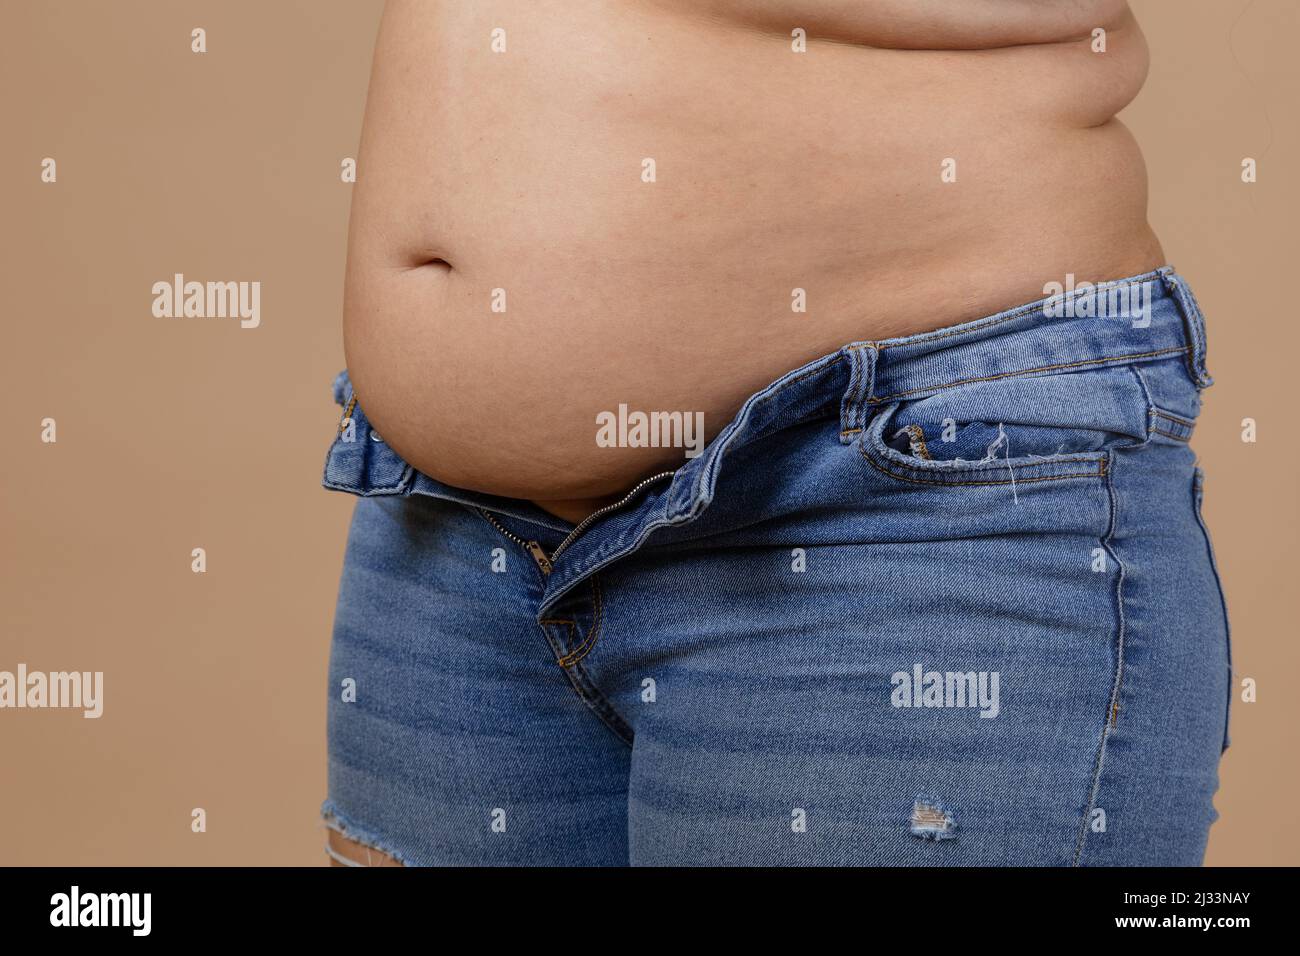 Overweight Woman With Big Belly Stock Photo, Picture and Royalty Free  Image. Image 15497728.